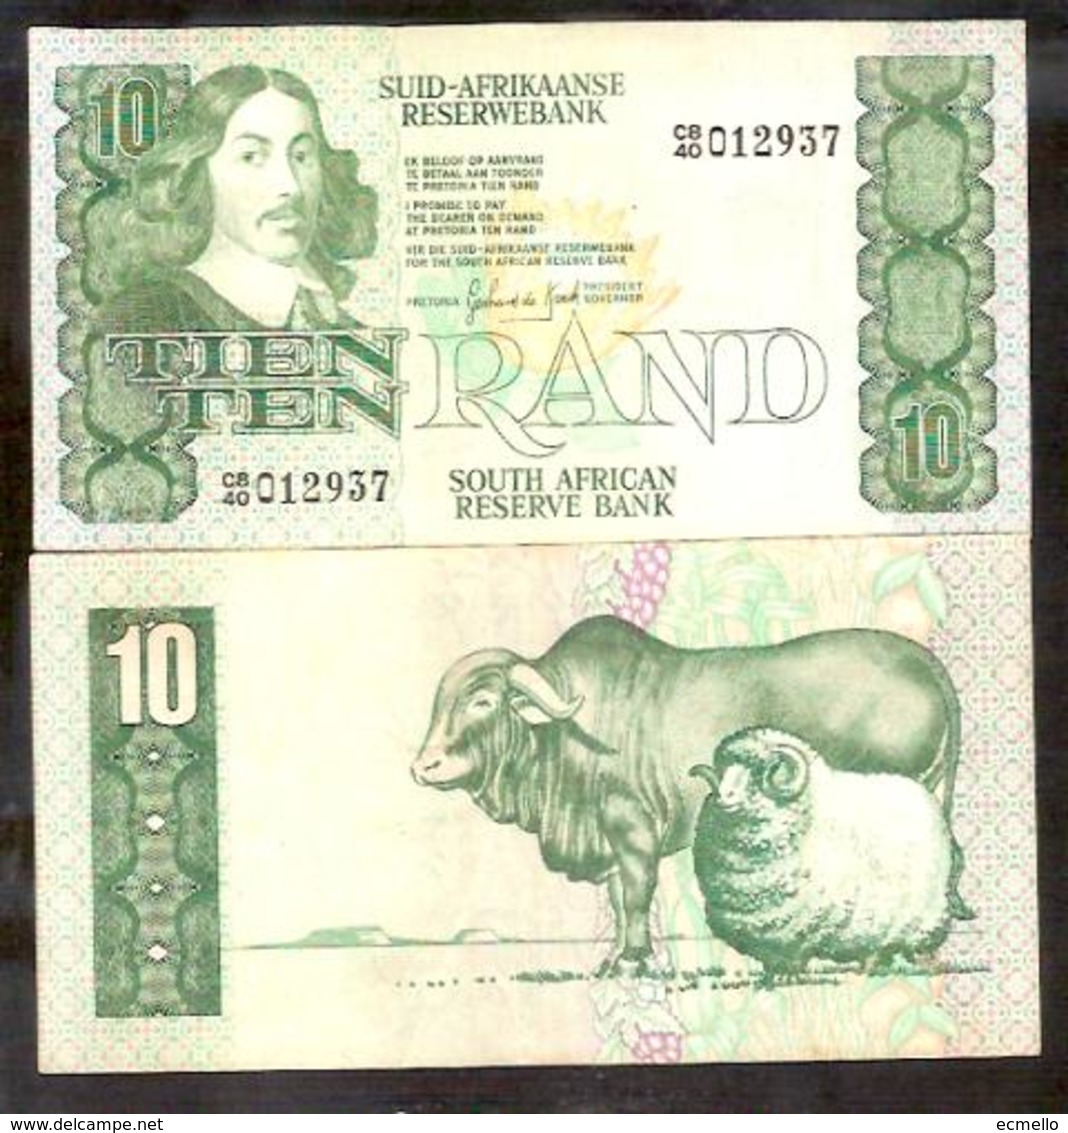 SOUTH AFRICA P120c 10 RAND 1980'S VF - South Africa